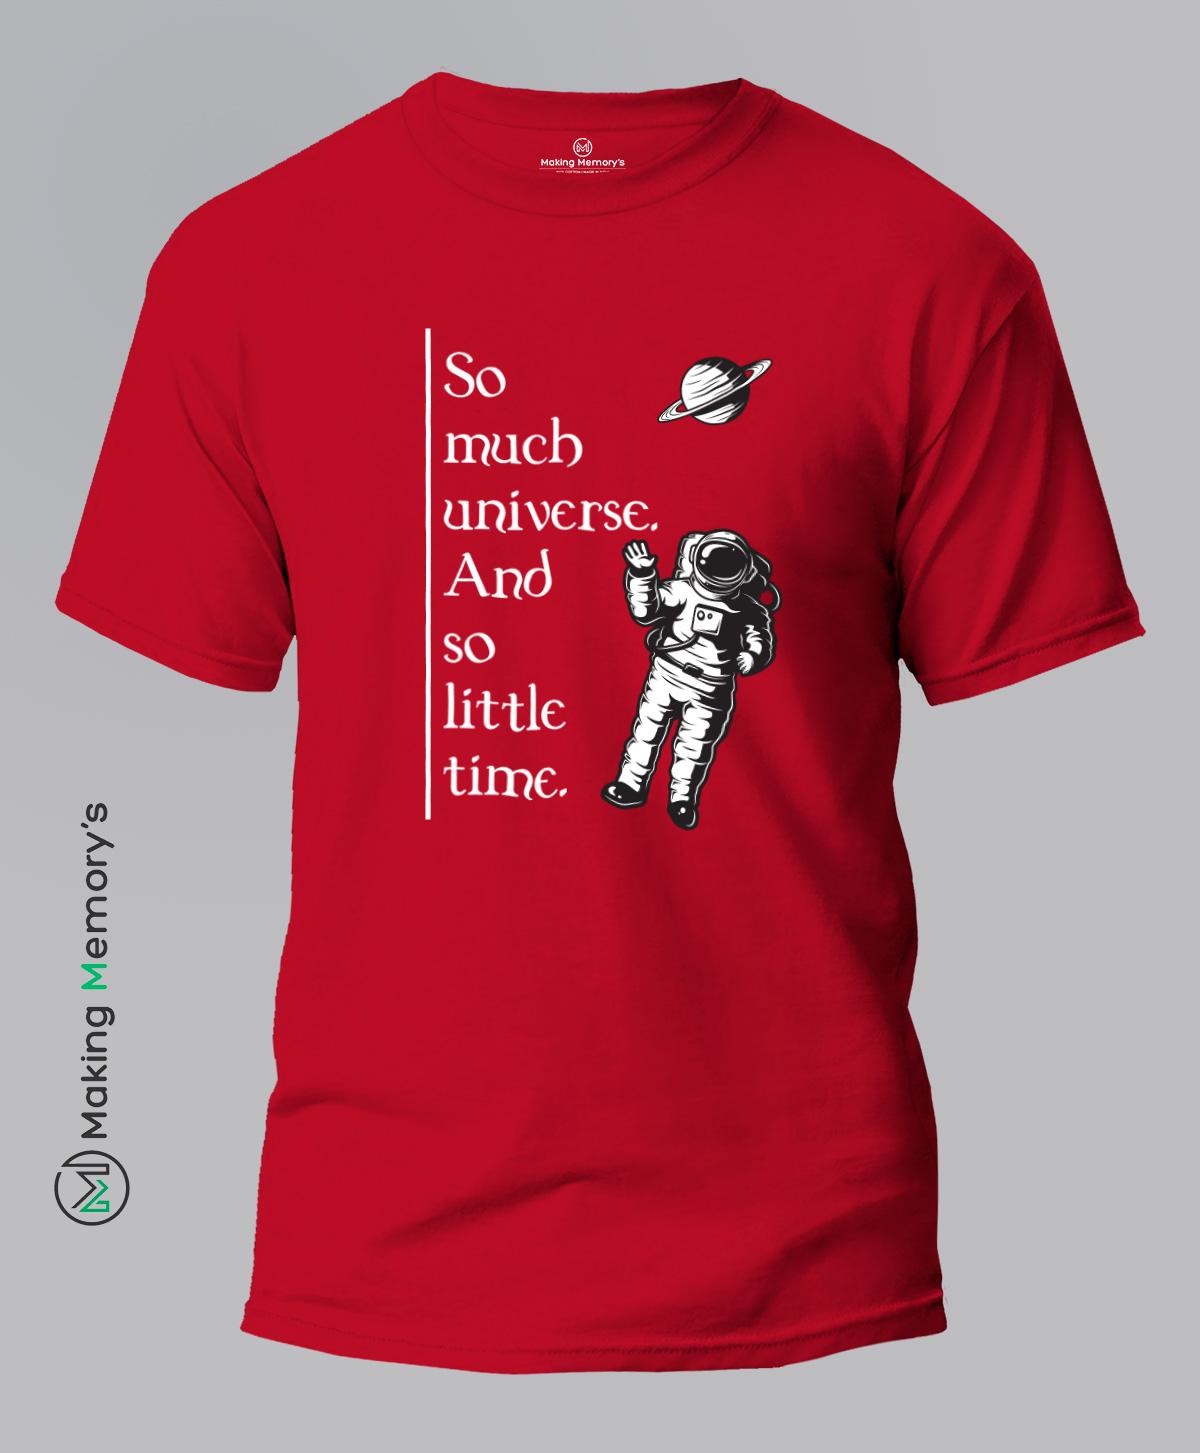 So-much-universe-and-so-little-time-red-t-shirt